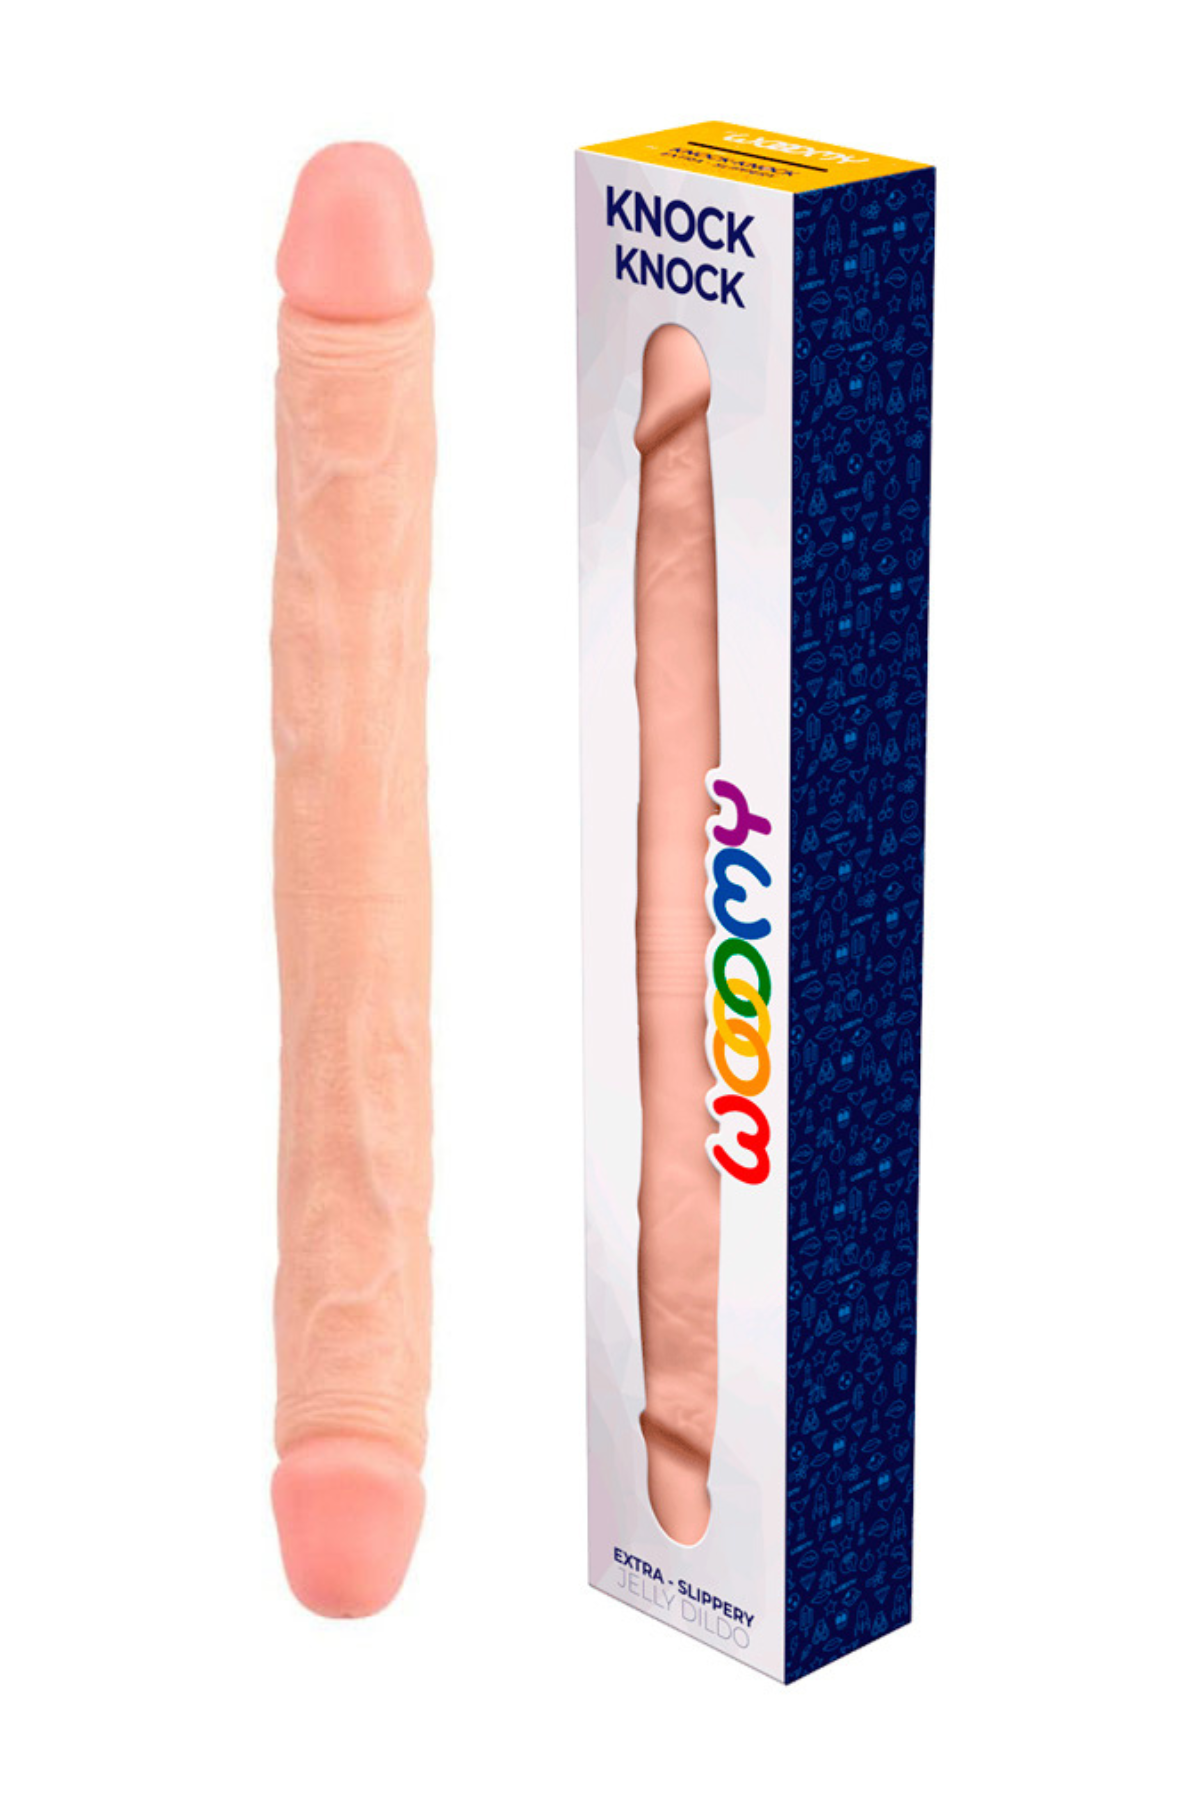 Knock-Knock Double-ended Dildo